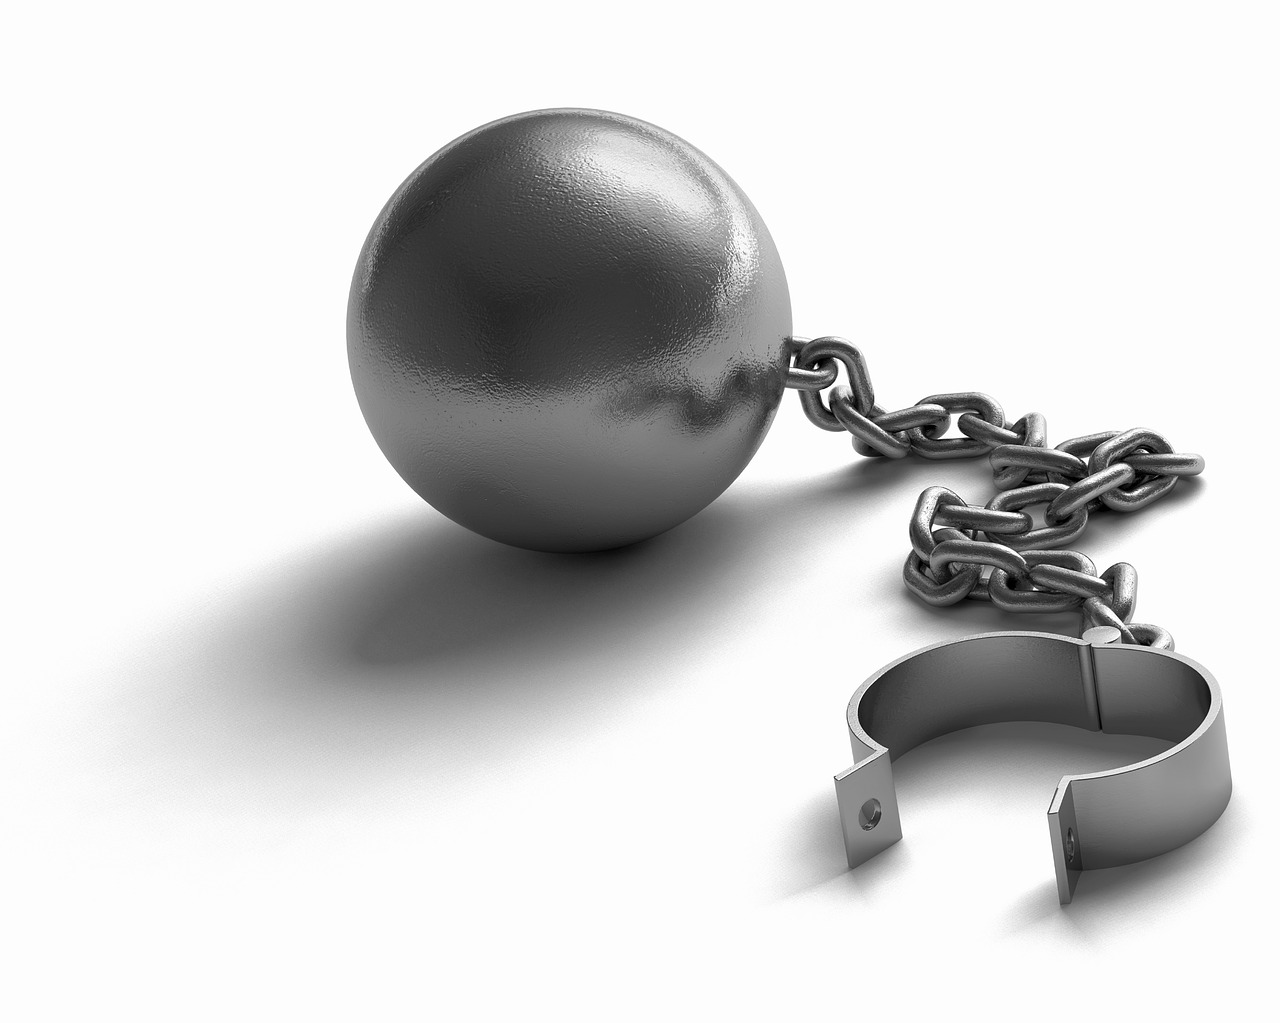 ball-and-chain-2624325_1280